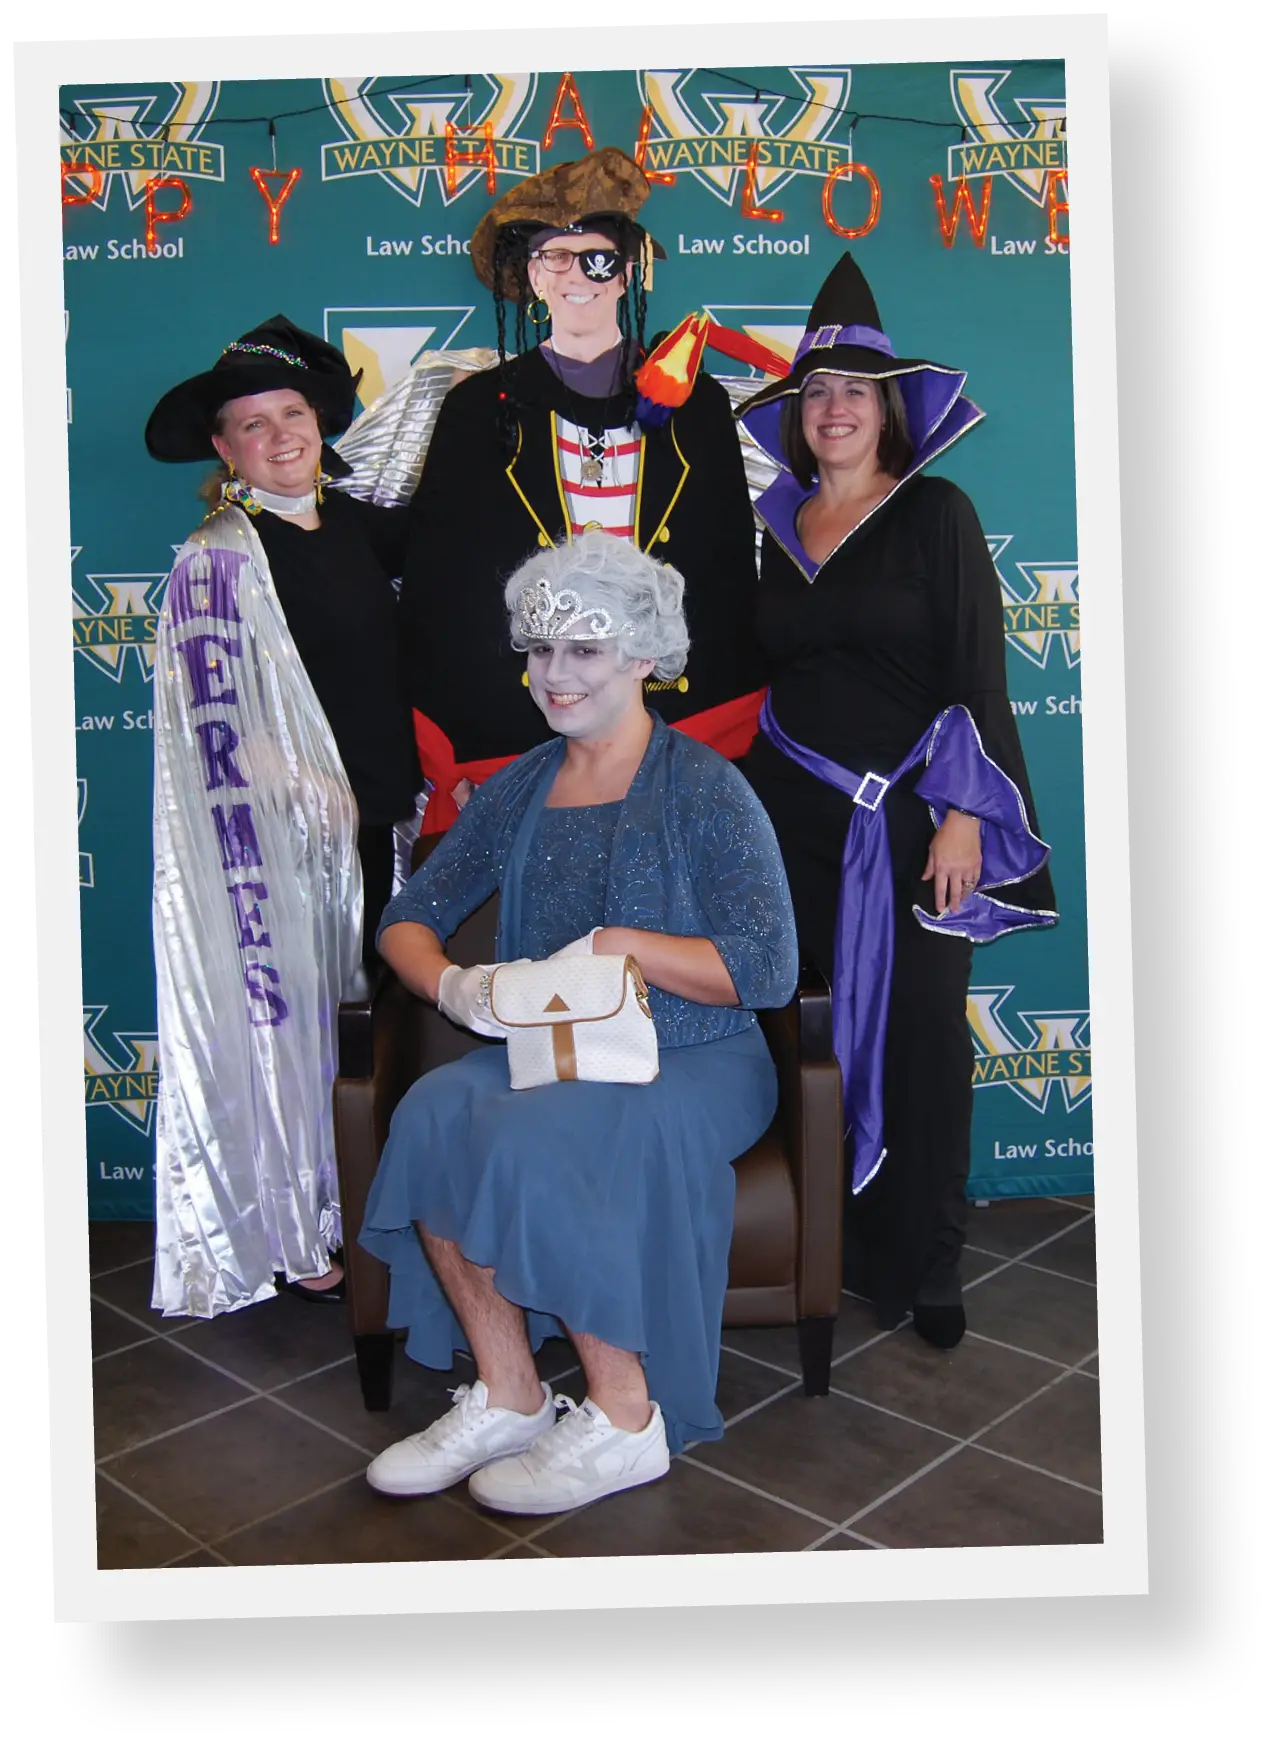 Three faculty members posing for picture during halloween party dressed in halloween costumes